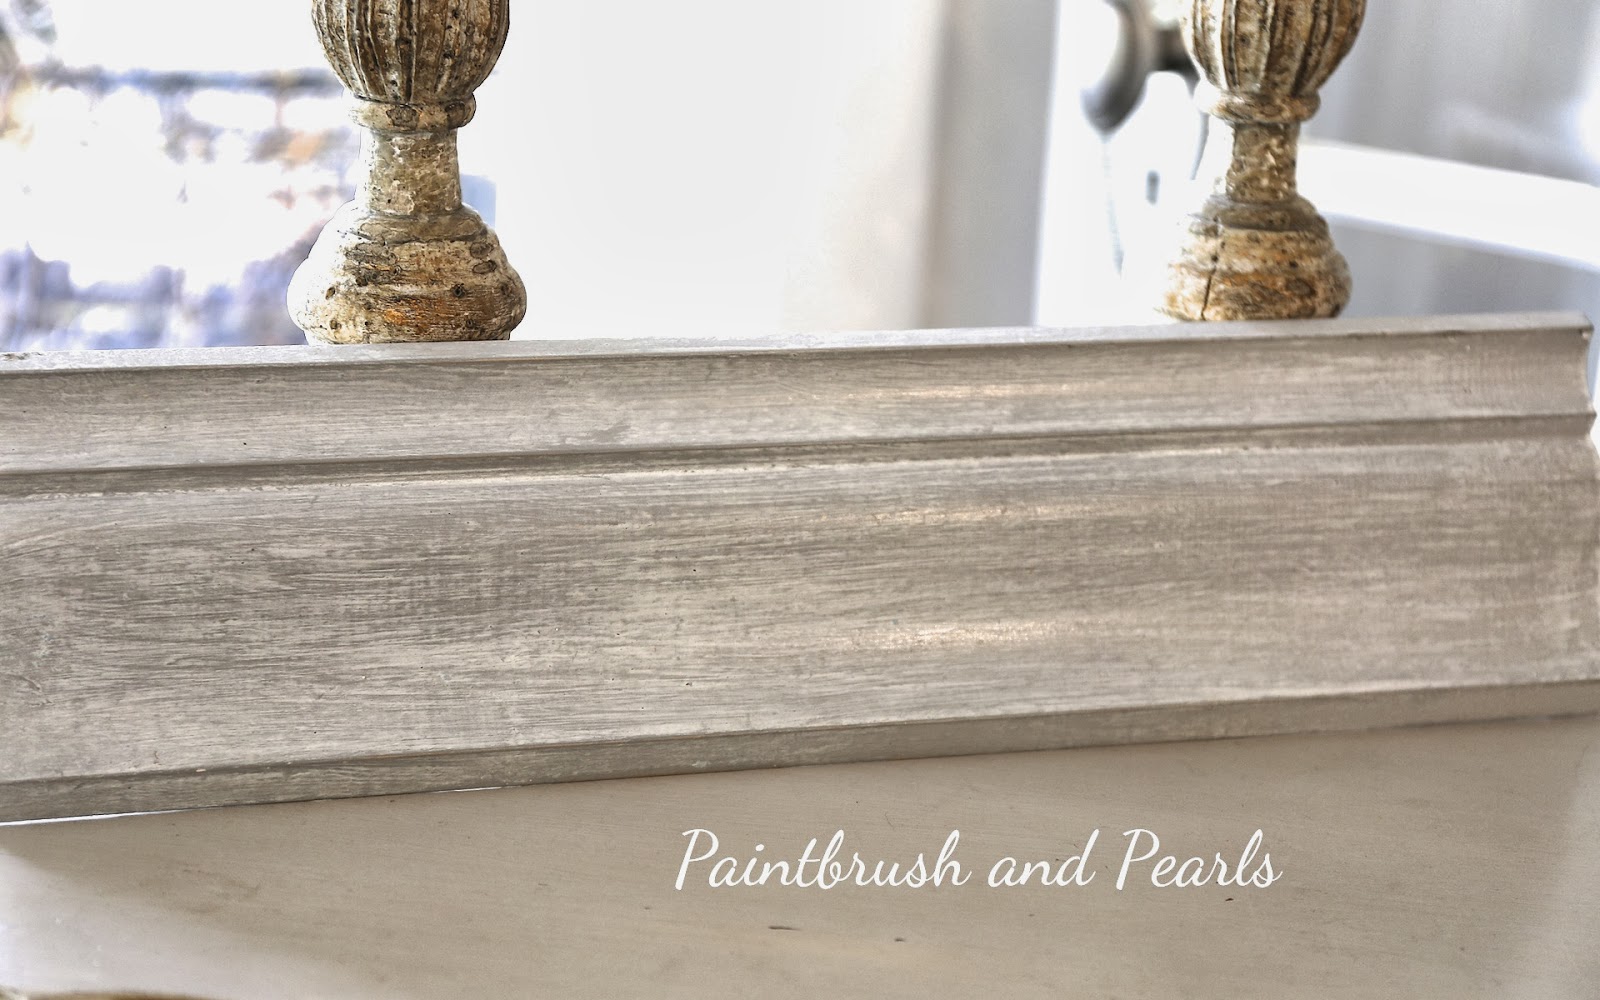 Brocante Home Collection's Paintbrush and Pearls Dry